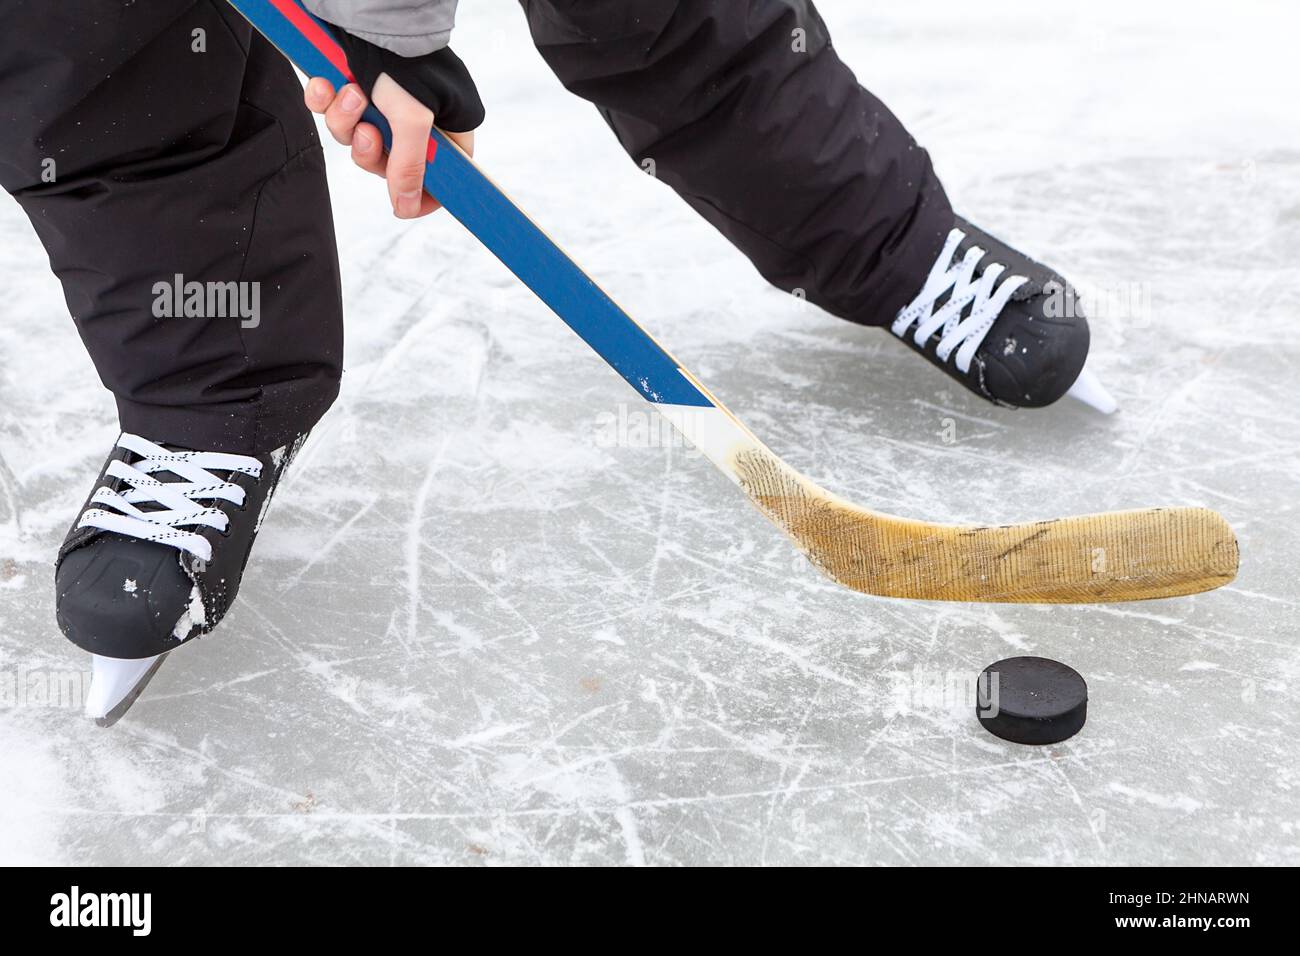 Hockey man runs with blade of stick and puck, close up view Stock Photo